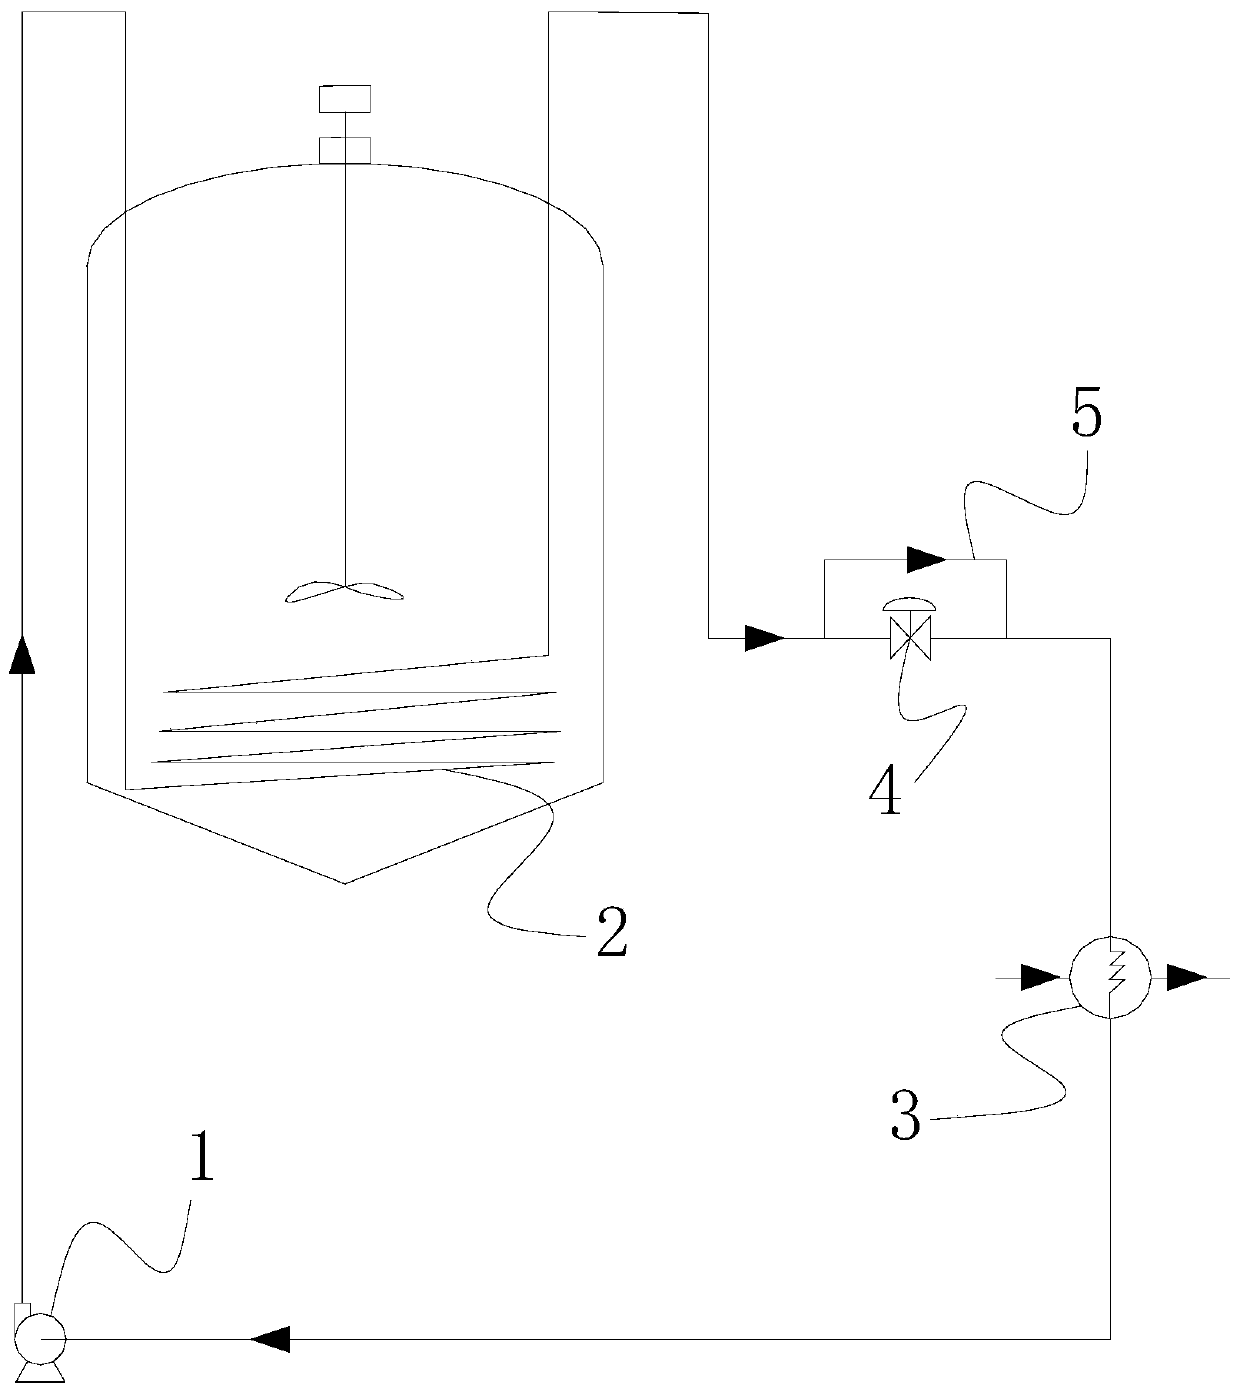 Temperature control system of exothermic reaction process